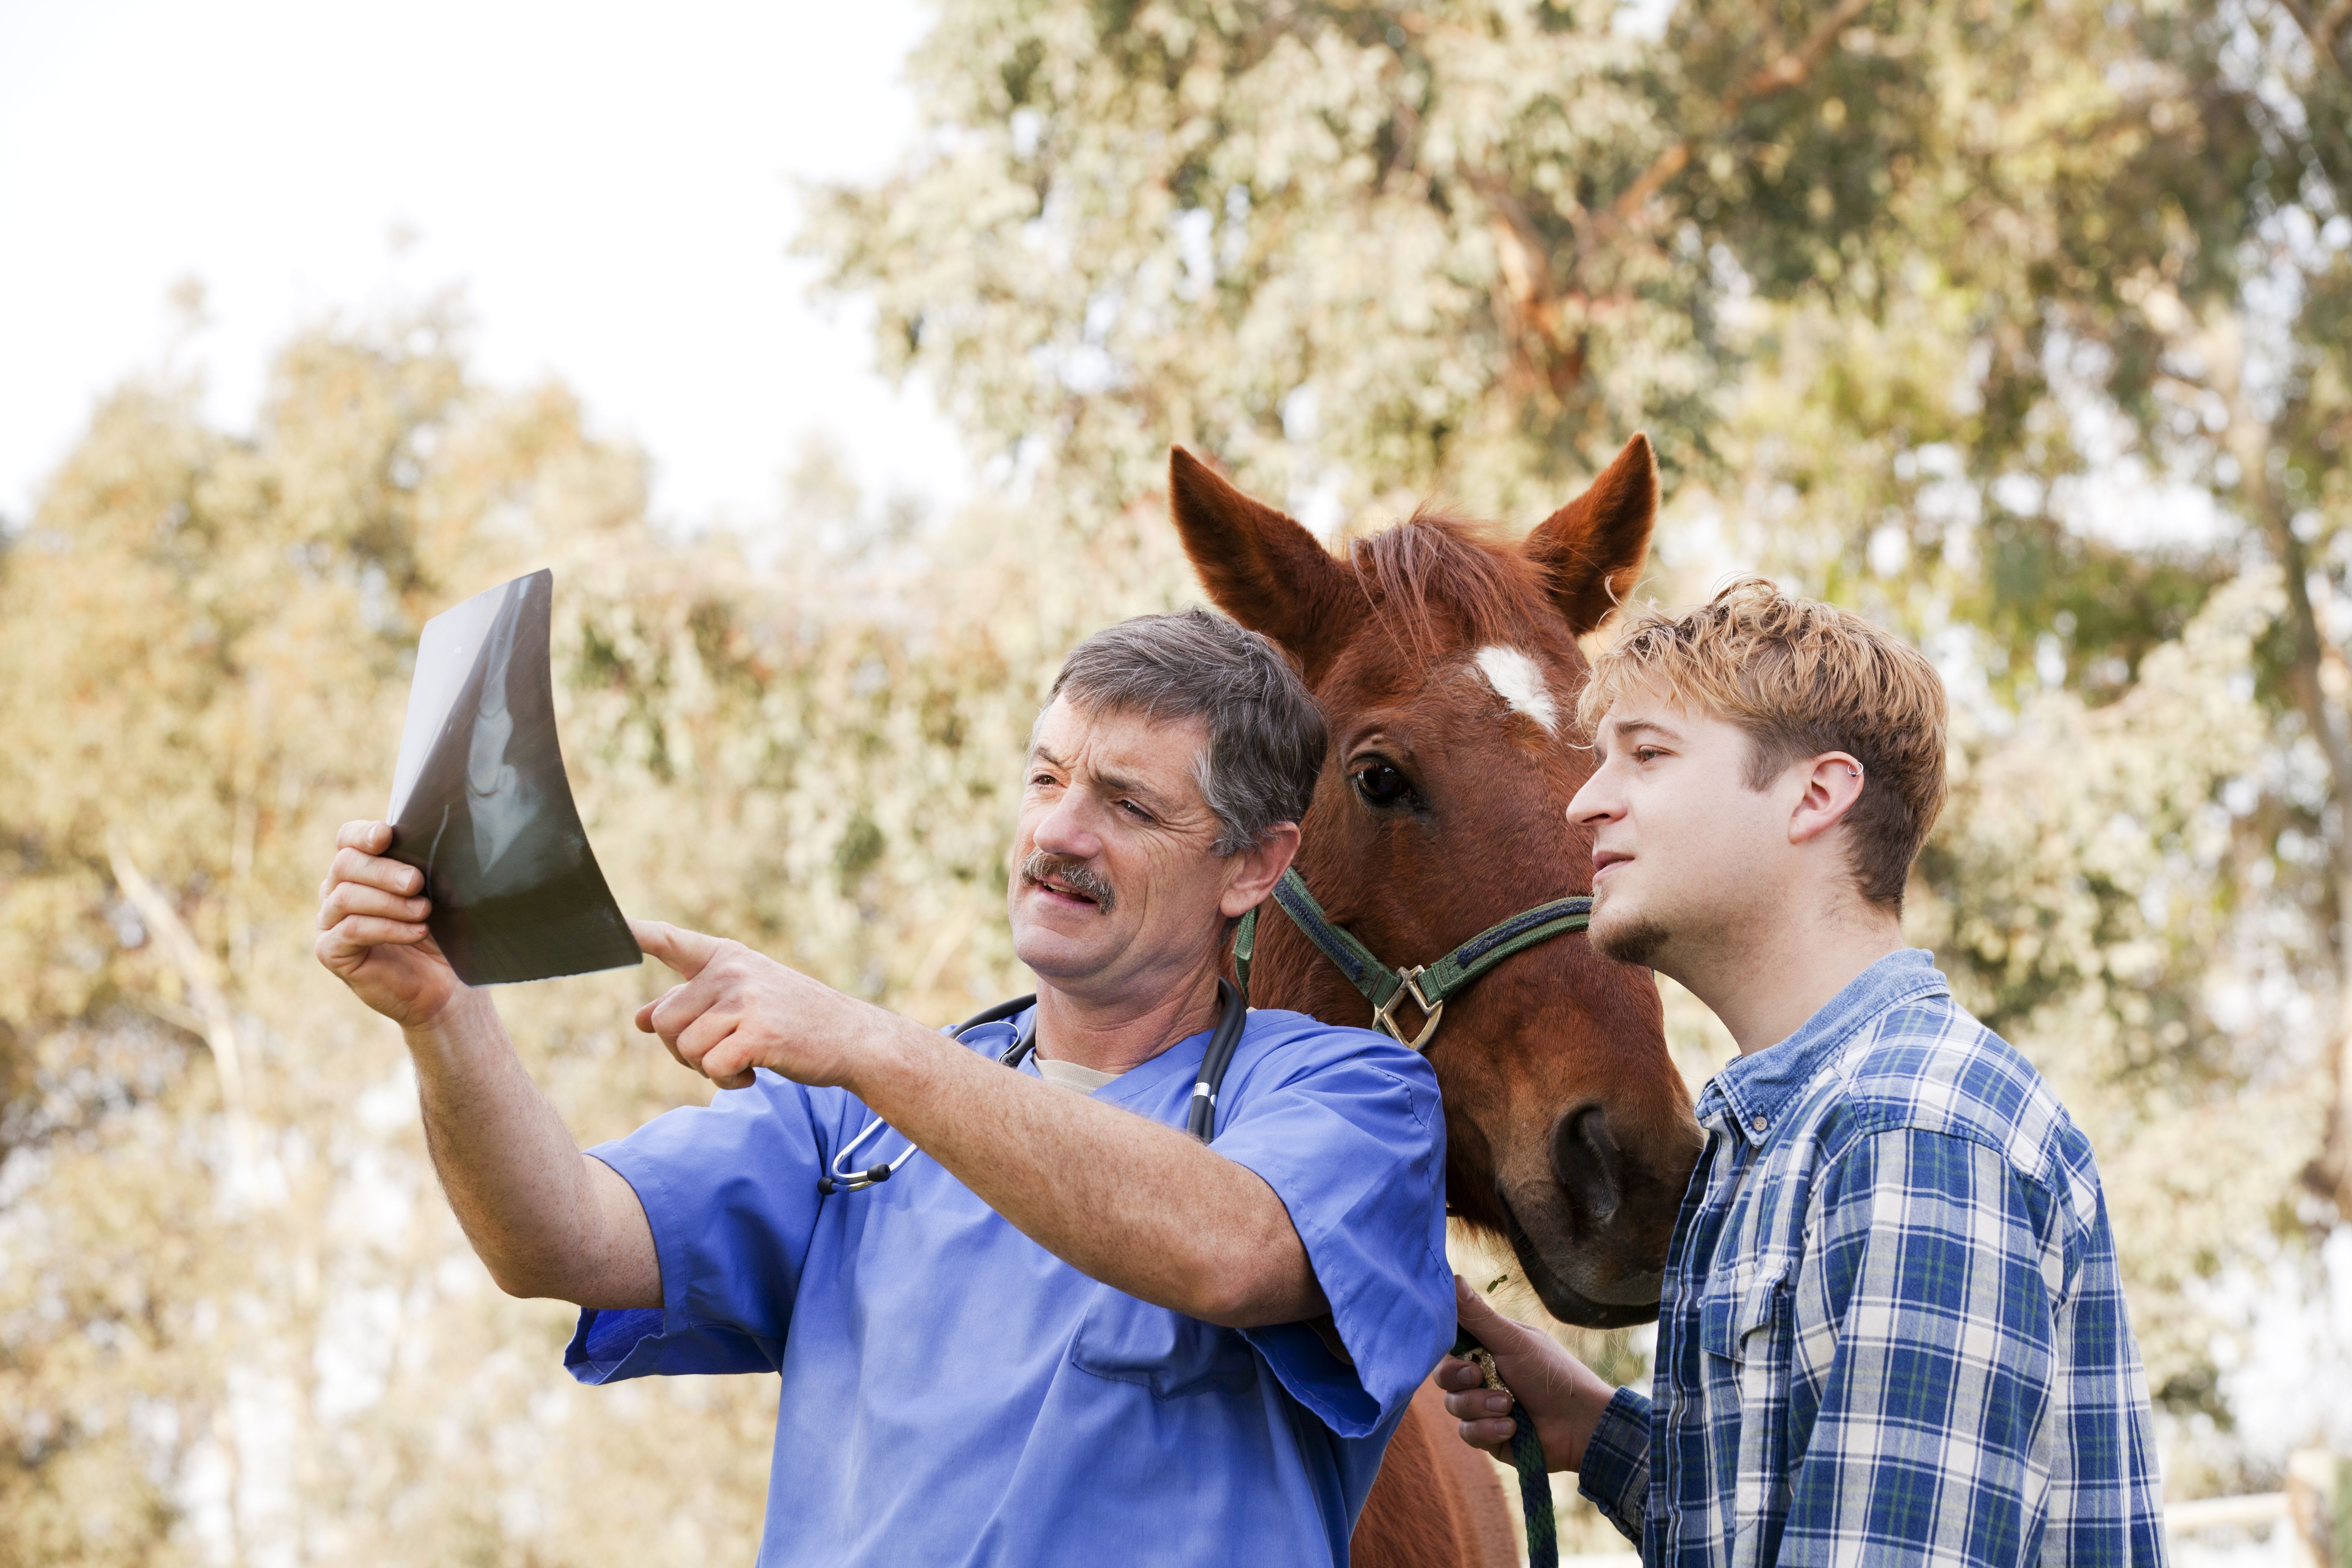 Vet discussing X-ray results with horse owner as horse stands behind them.